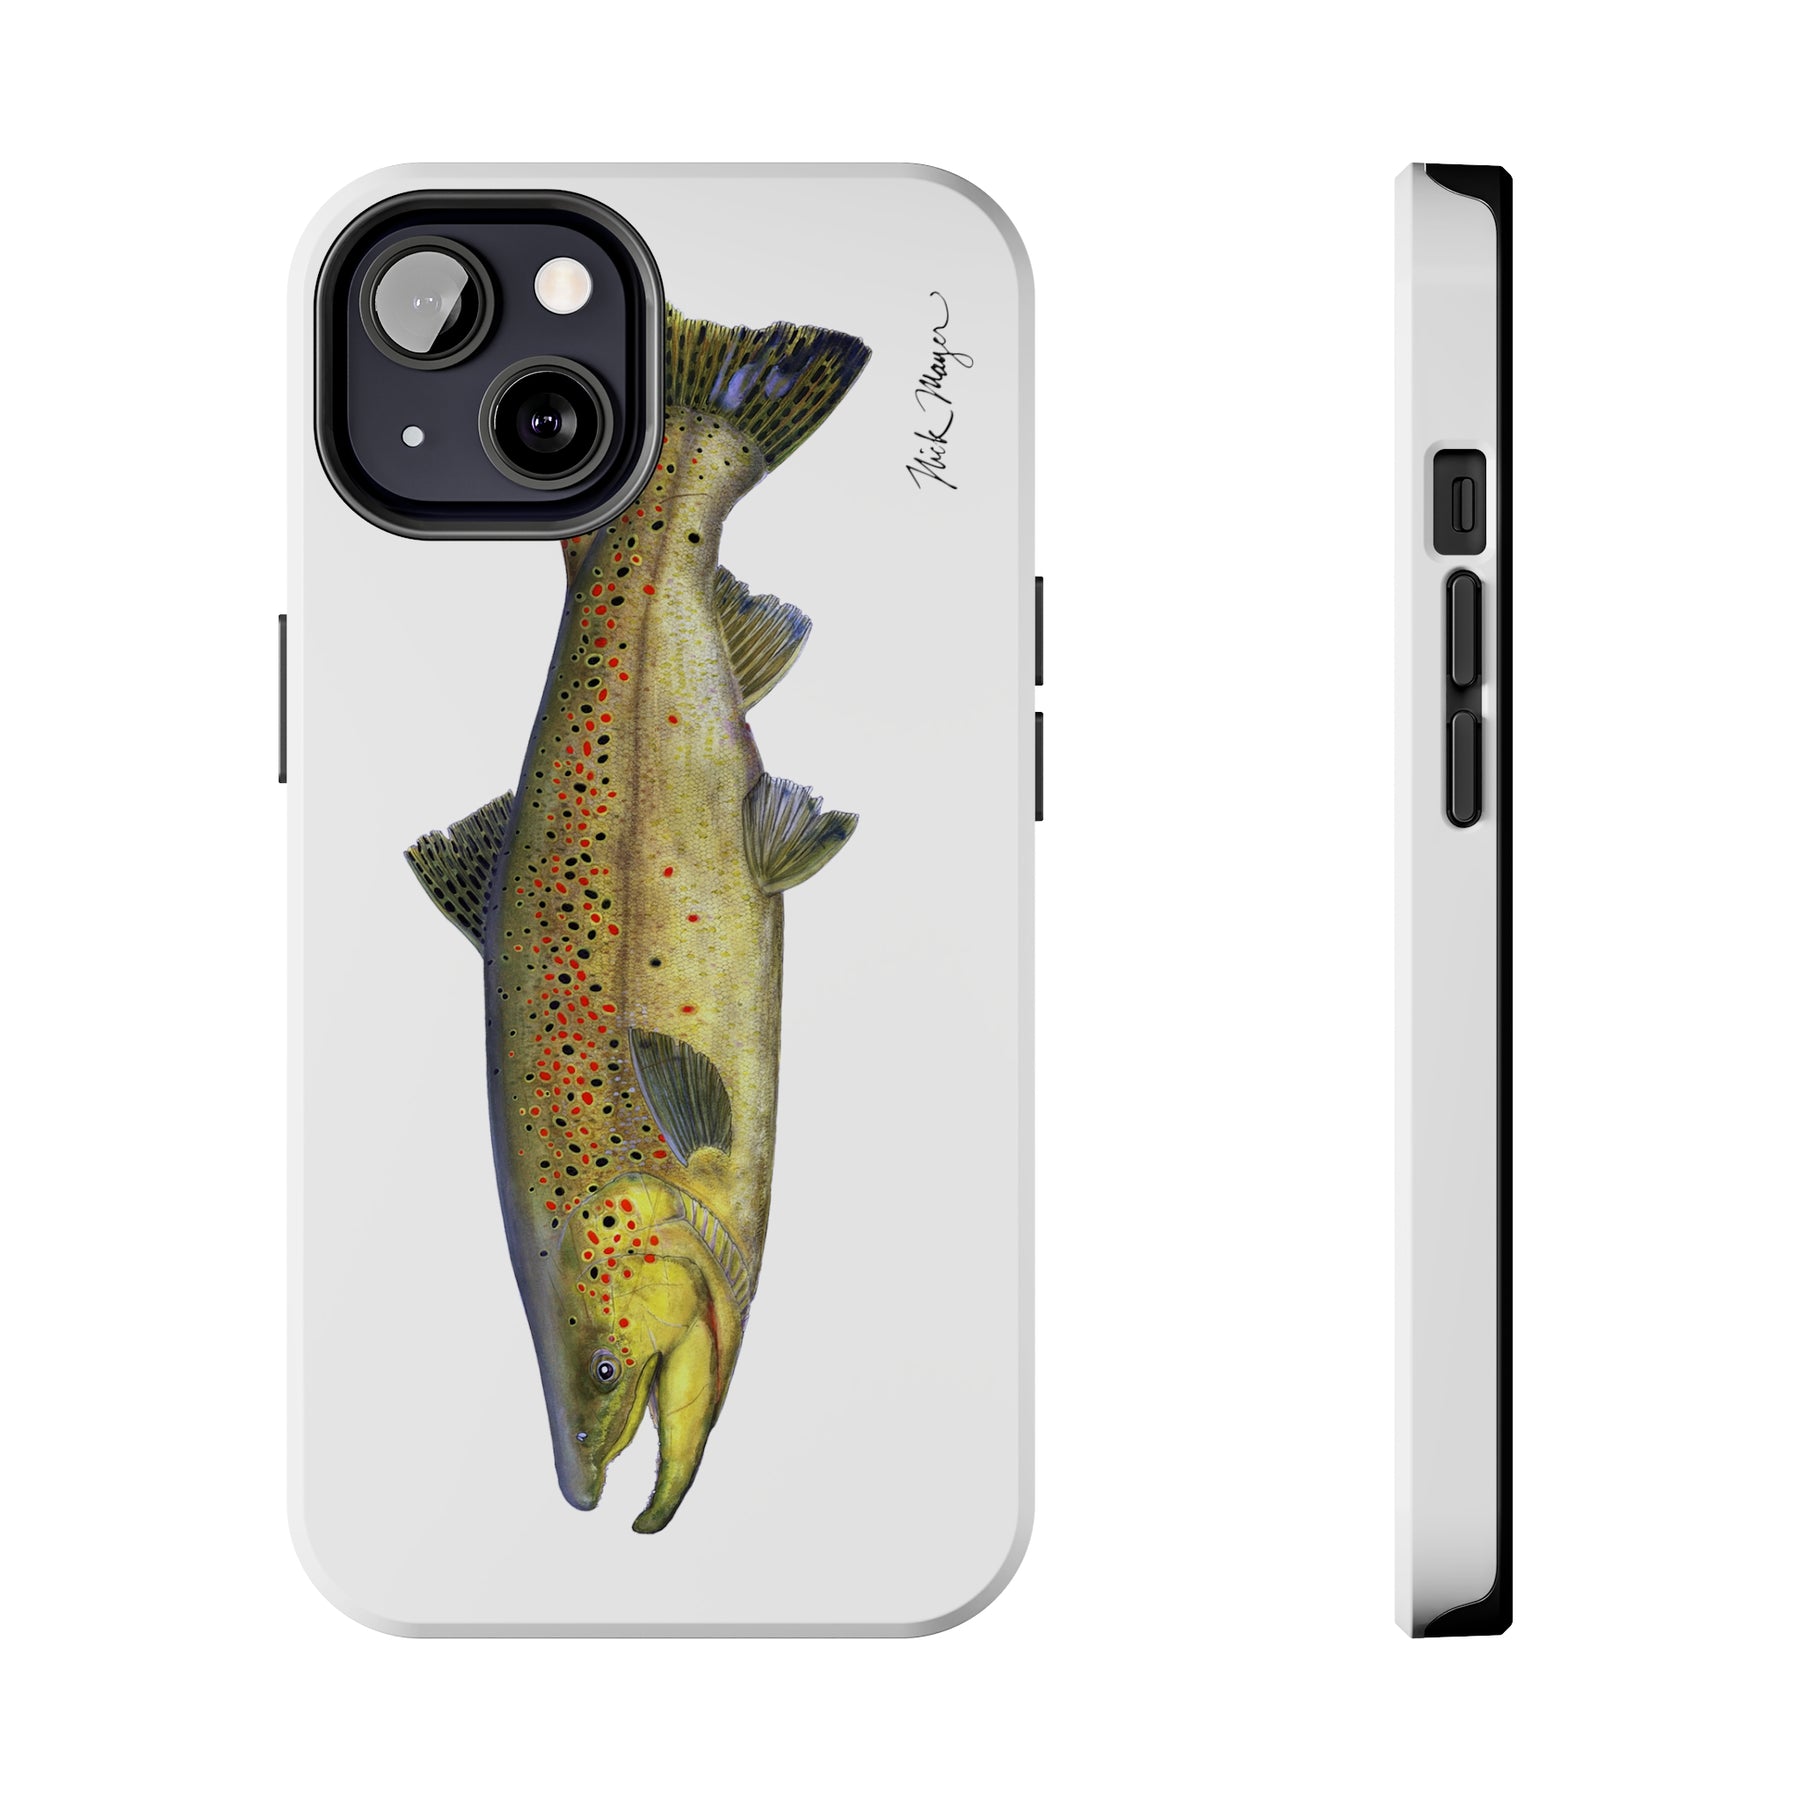 Nick Mayer's Rainbow Trout iPhone Case: Durable